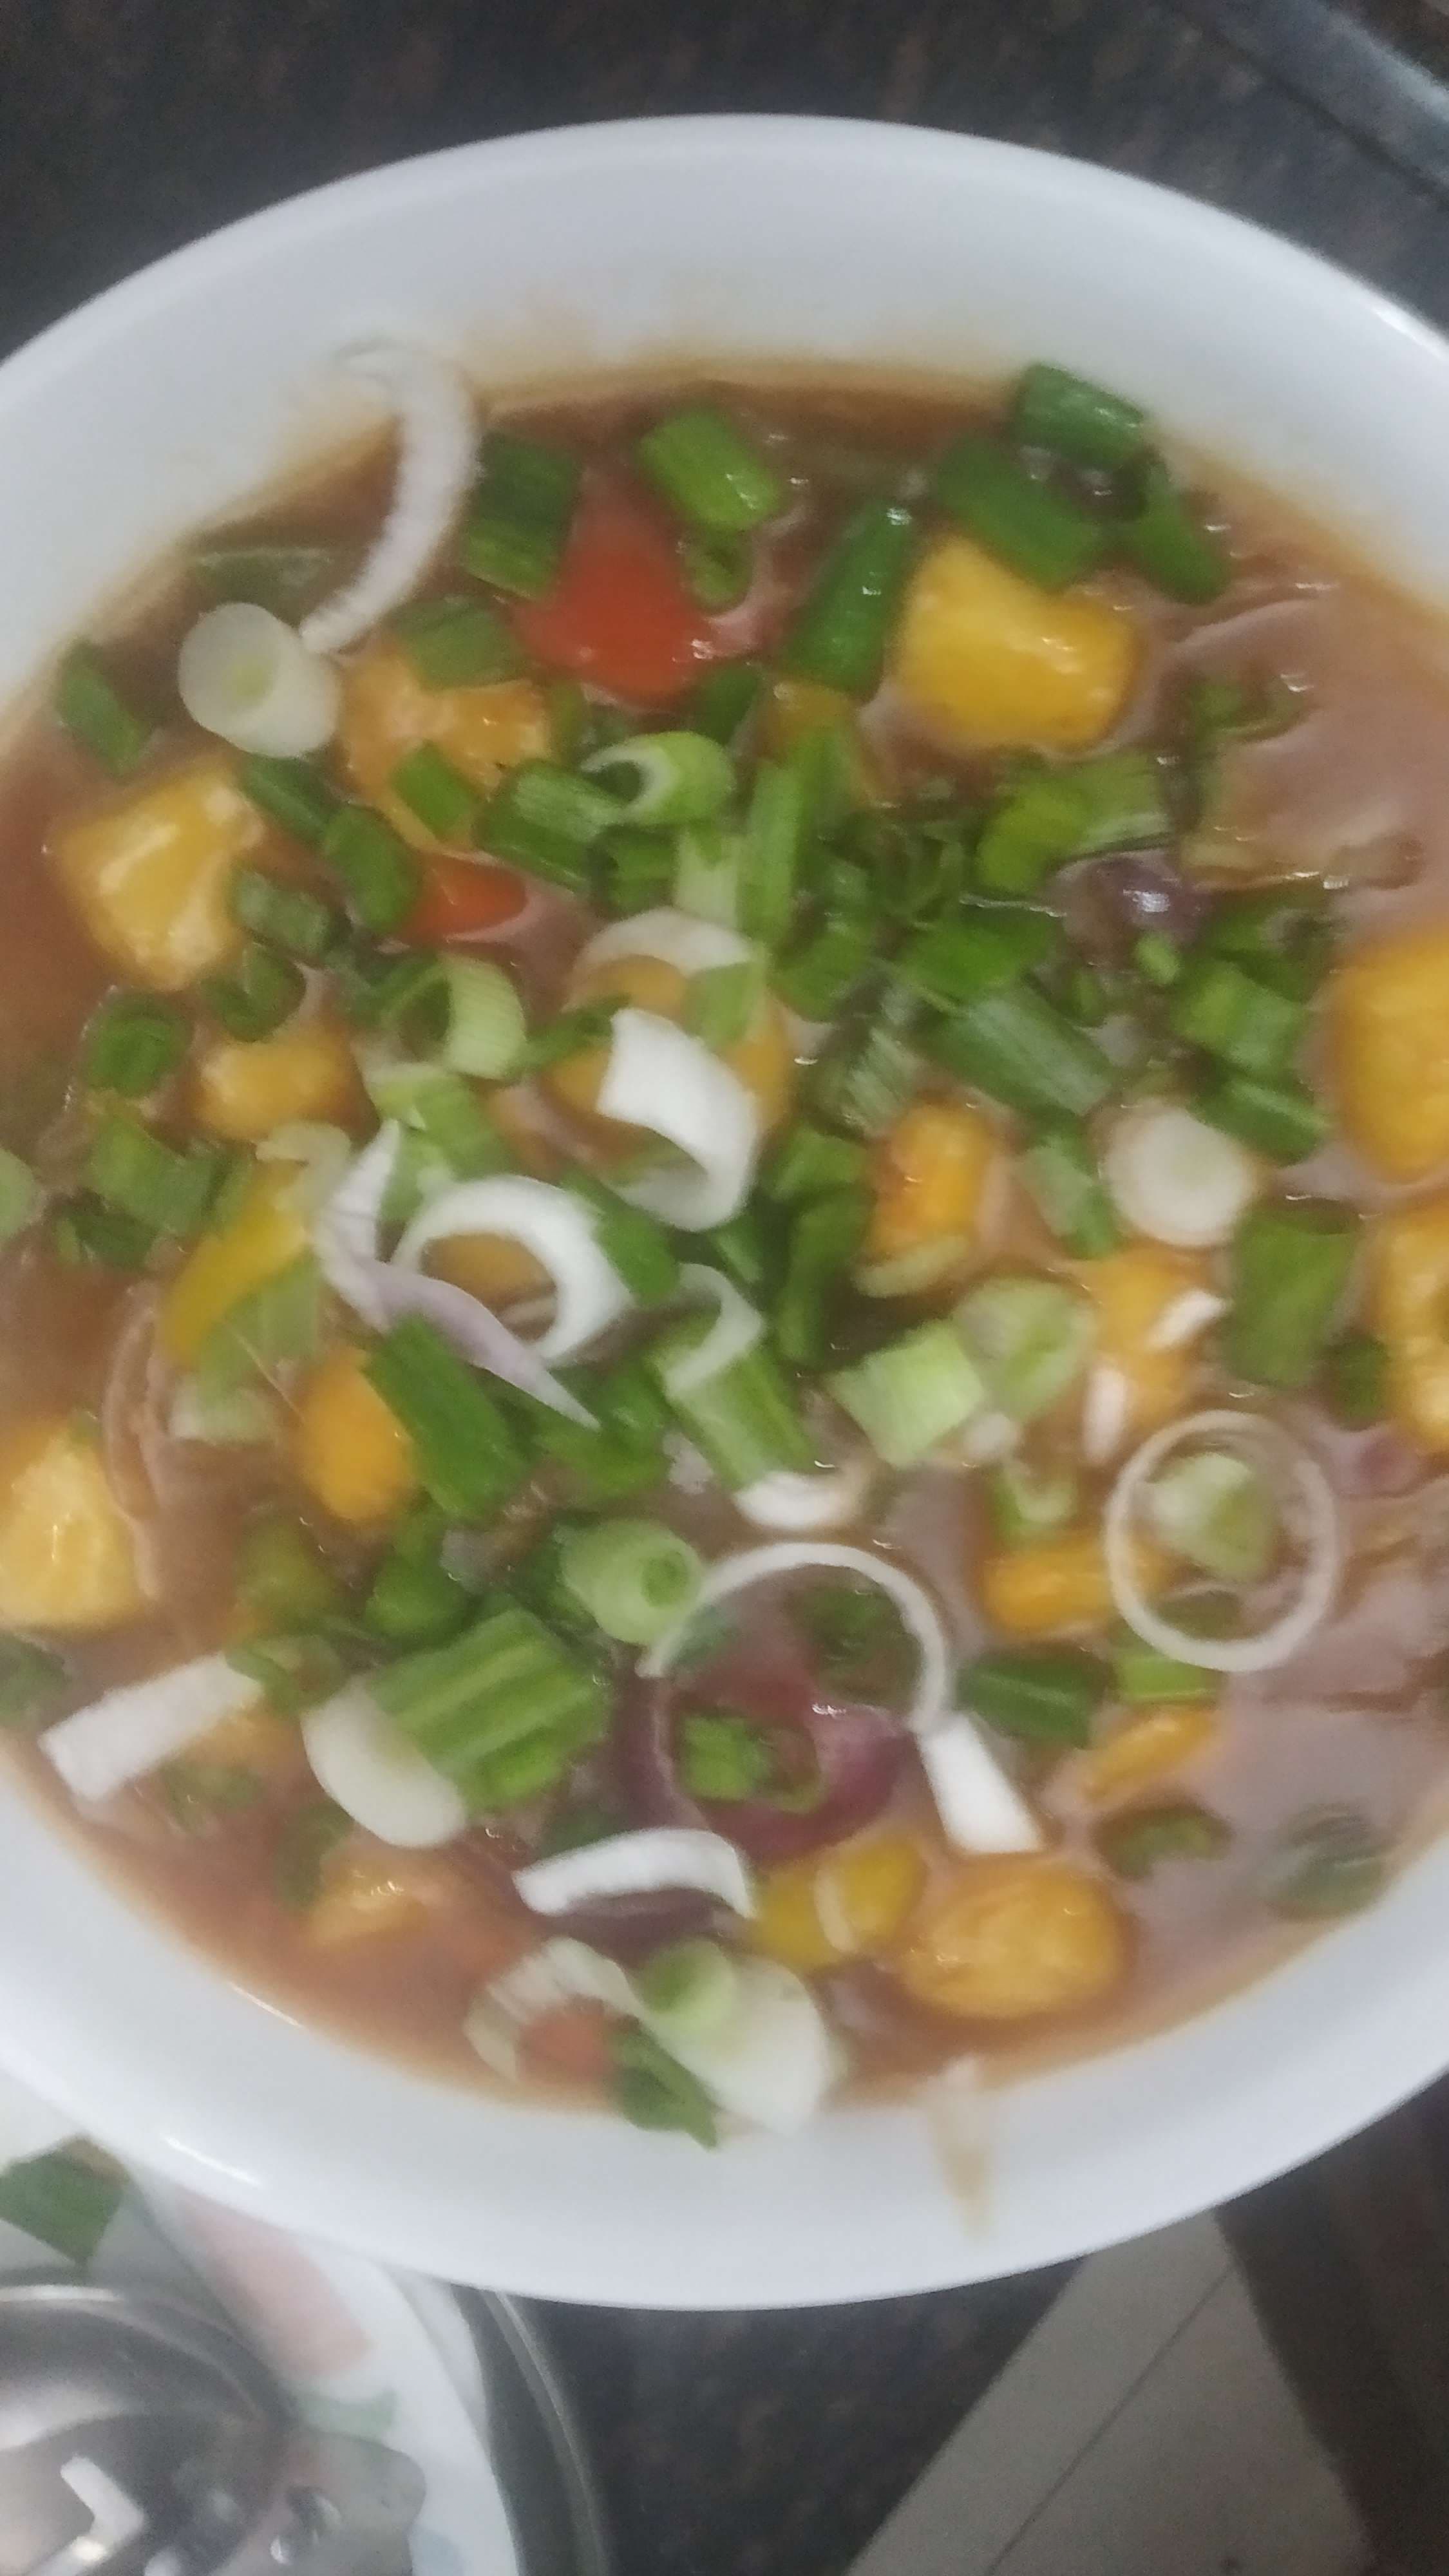 Delicious Chilly Paneer (Gravy) prepared by COOX